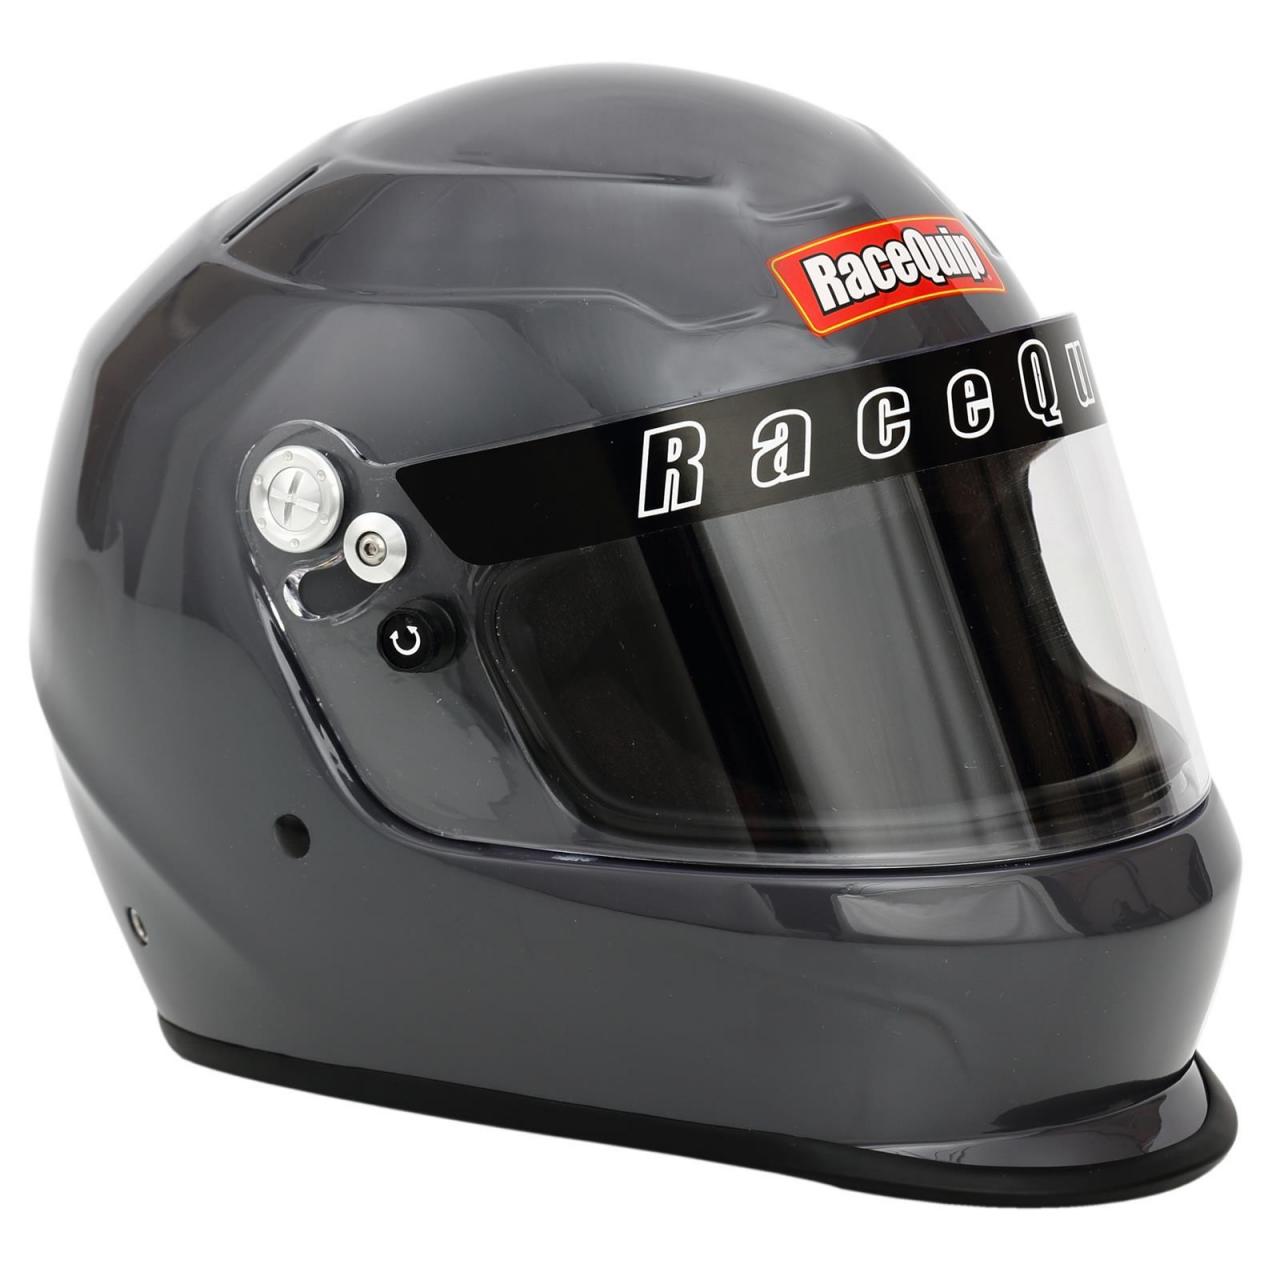 The Official Site of RaceQuip® and Safe-Quip Brands